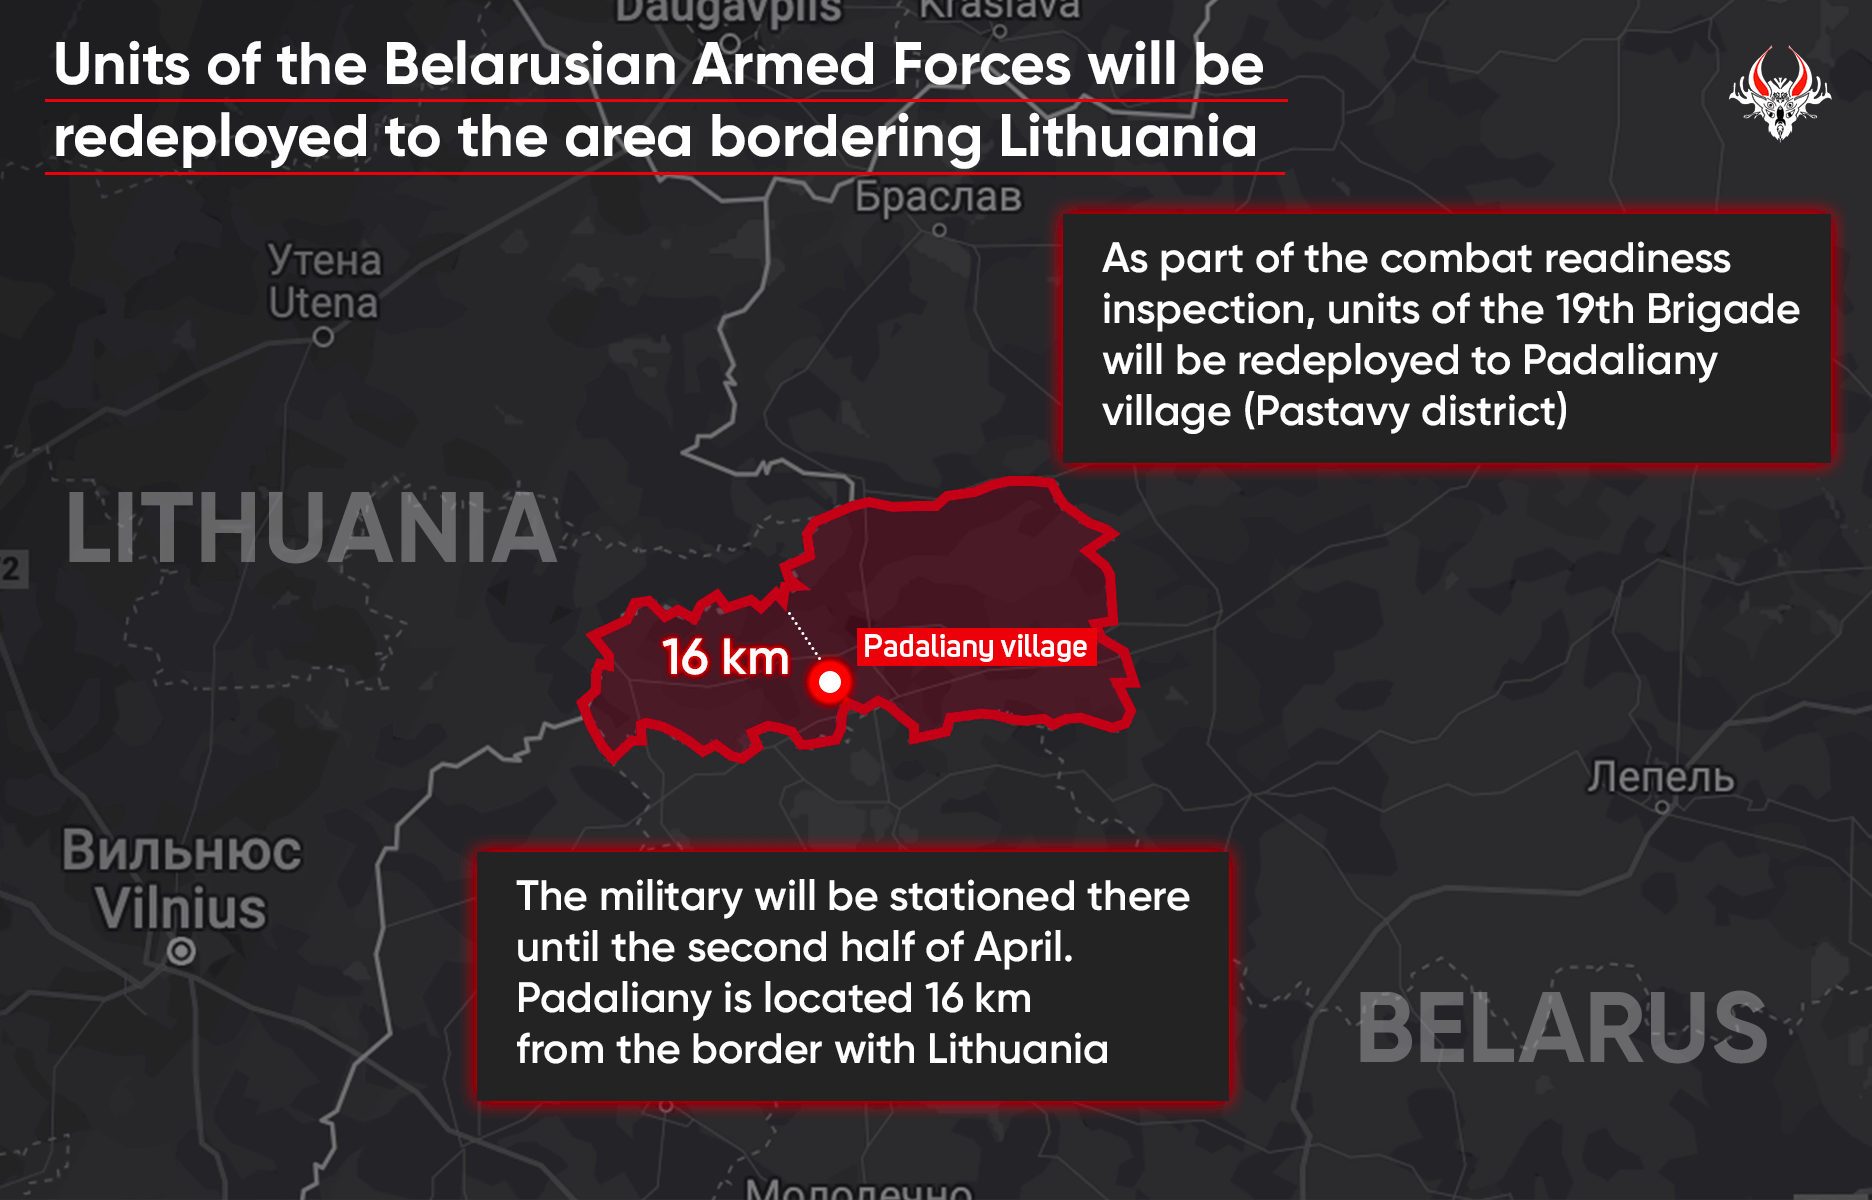 Units of the Belarusian Armed Forces will also be redeployed to Pastavy district